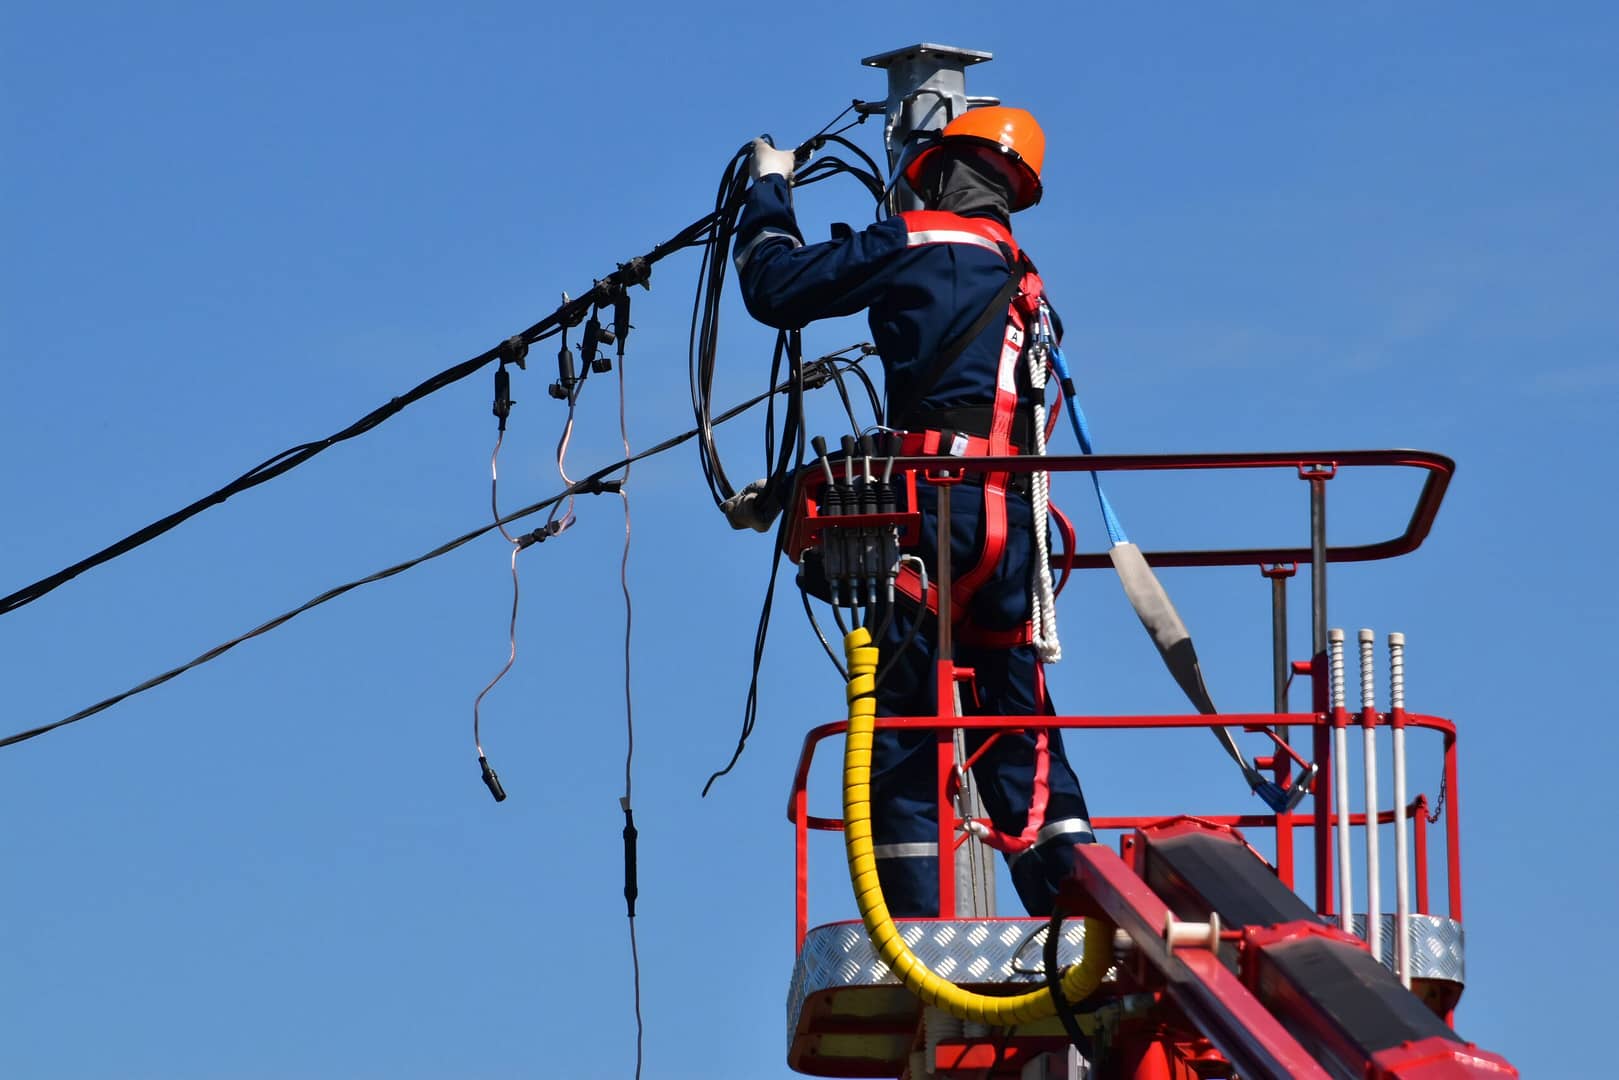 An electrical lineman stands in a basket platform, working on outside power lines wearing a hardhat and safety equipment. It’s important for the electrical contractor you hire to follow all proper safety guidelines, this is why finding a licensed electrician is so important.